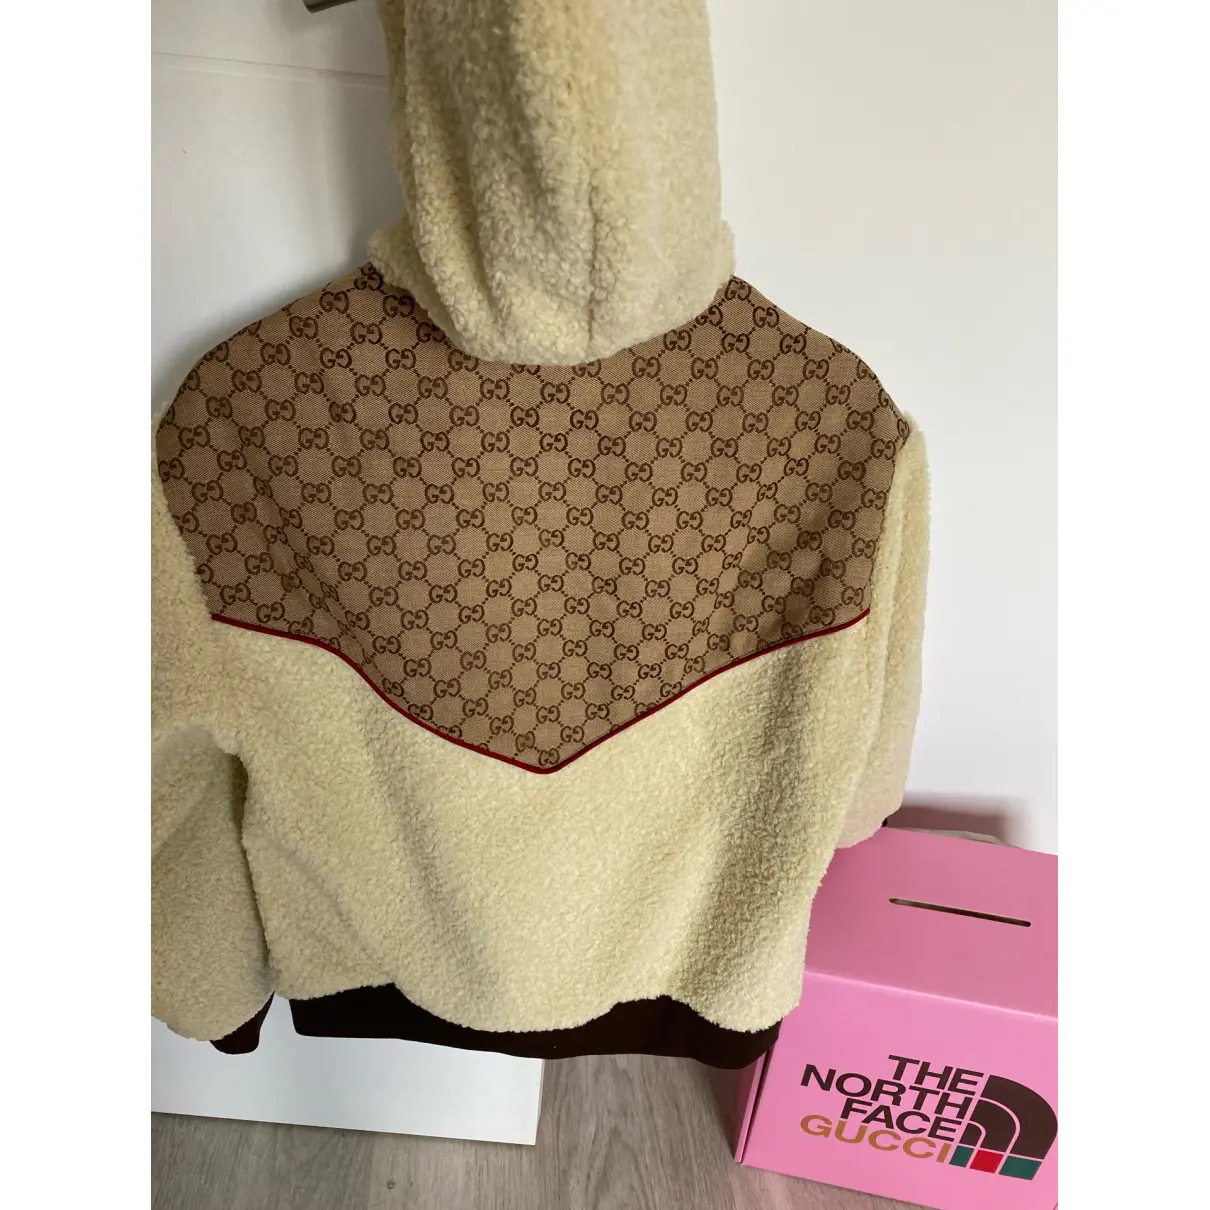 Buy The North Face x Gucci Wool sweatshirt online